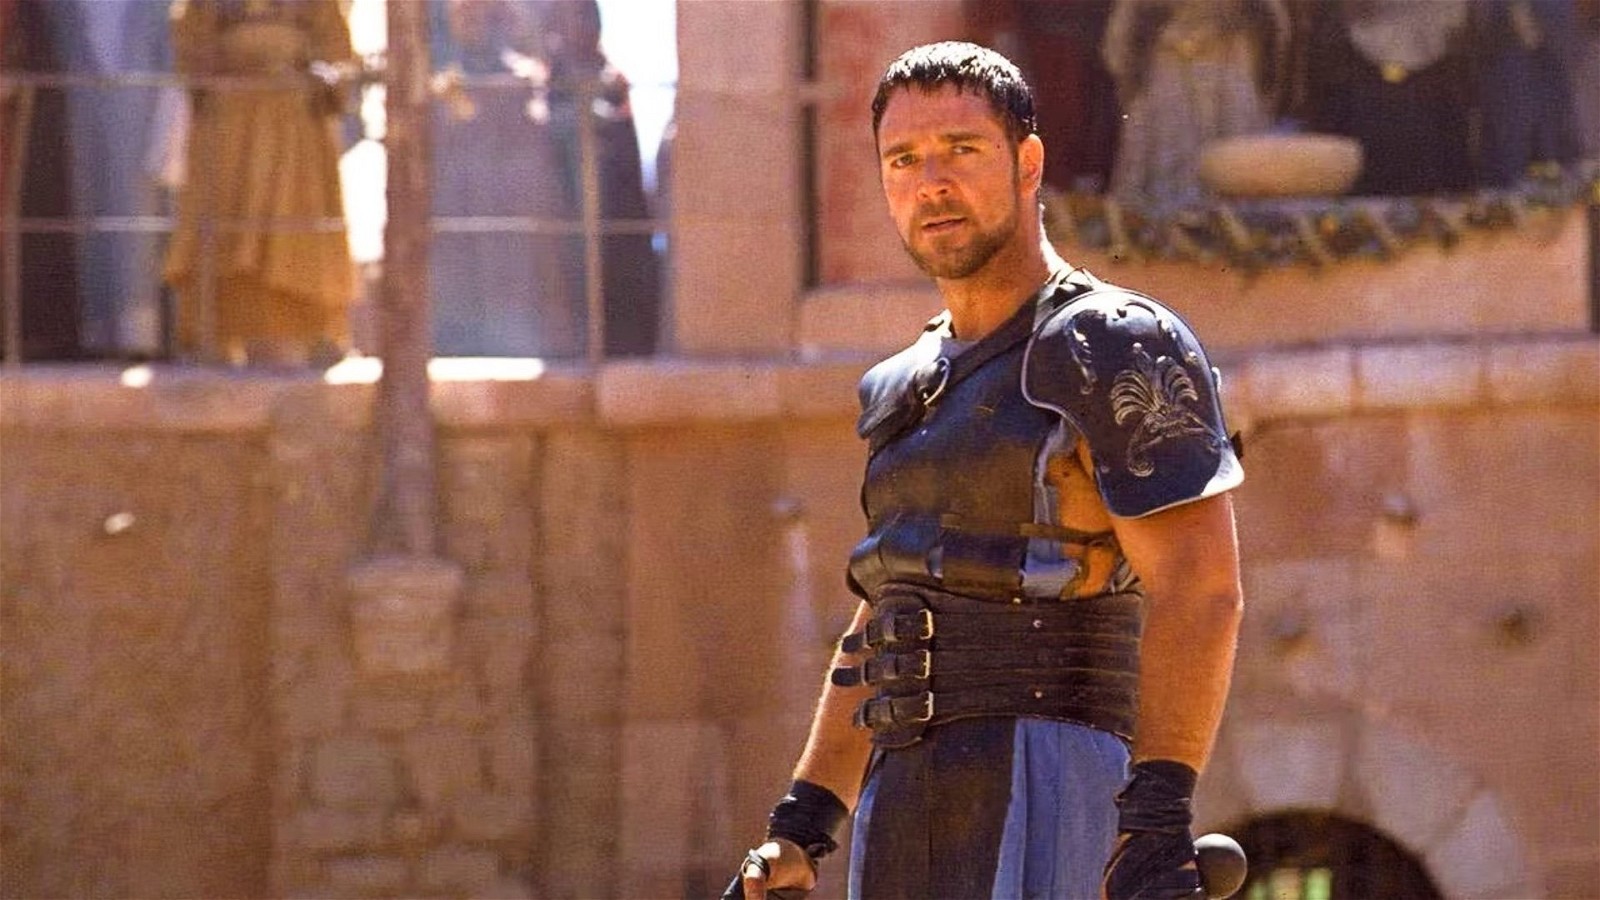 Russel Crowe in a stance in Gladiator